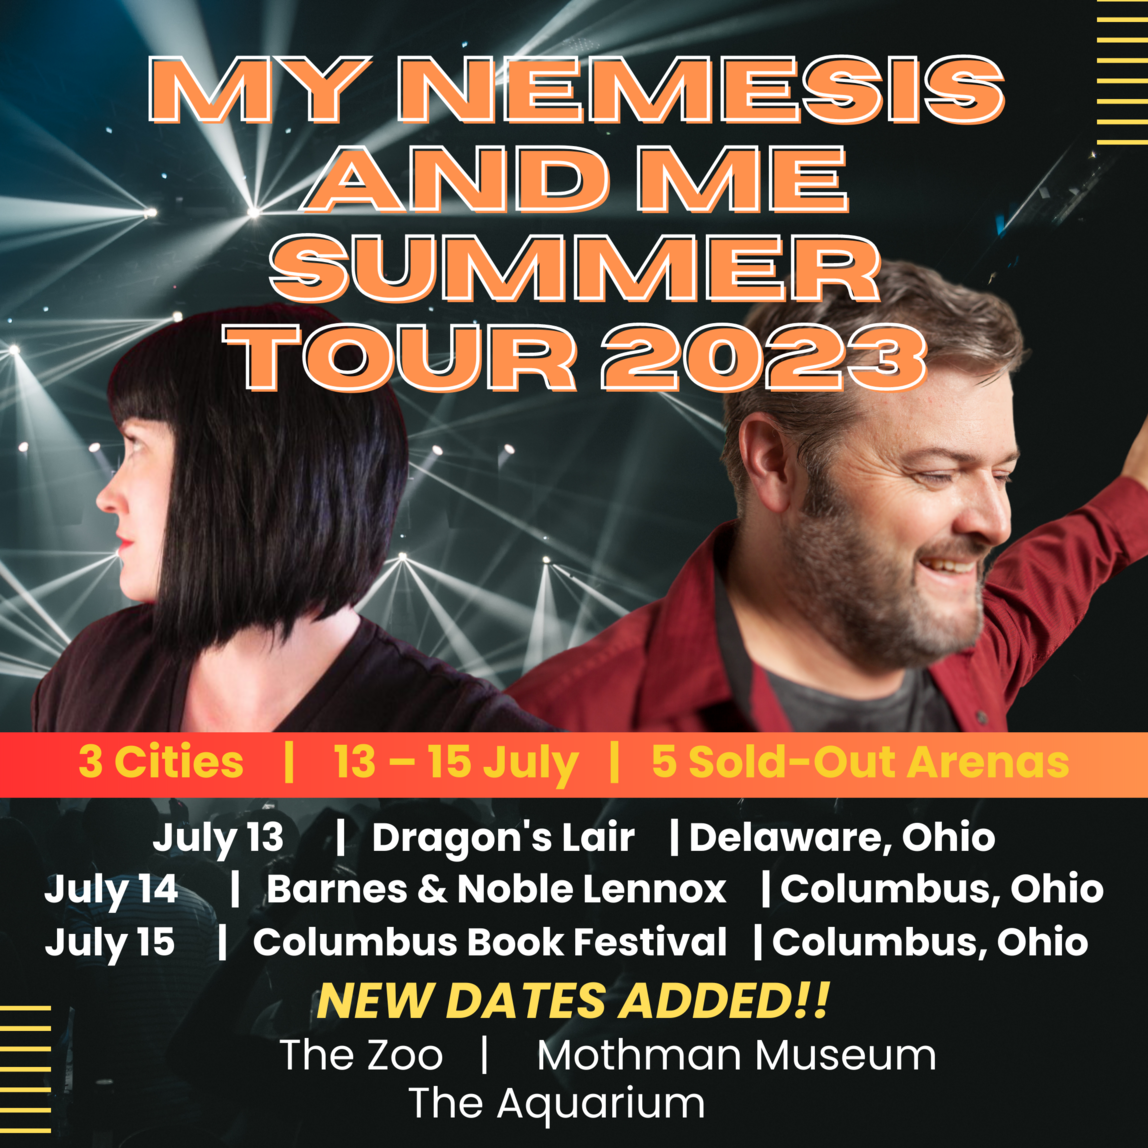 The My Nemesis and Me Summer Tour 2023!